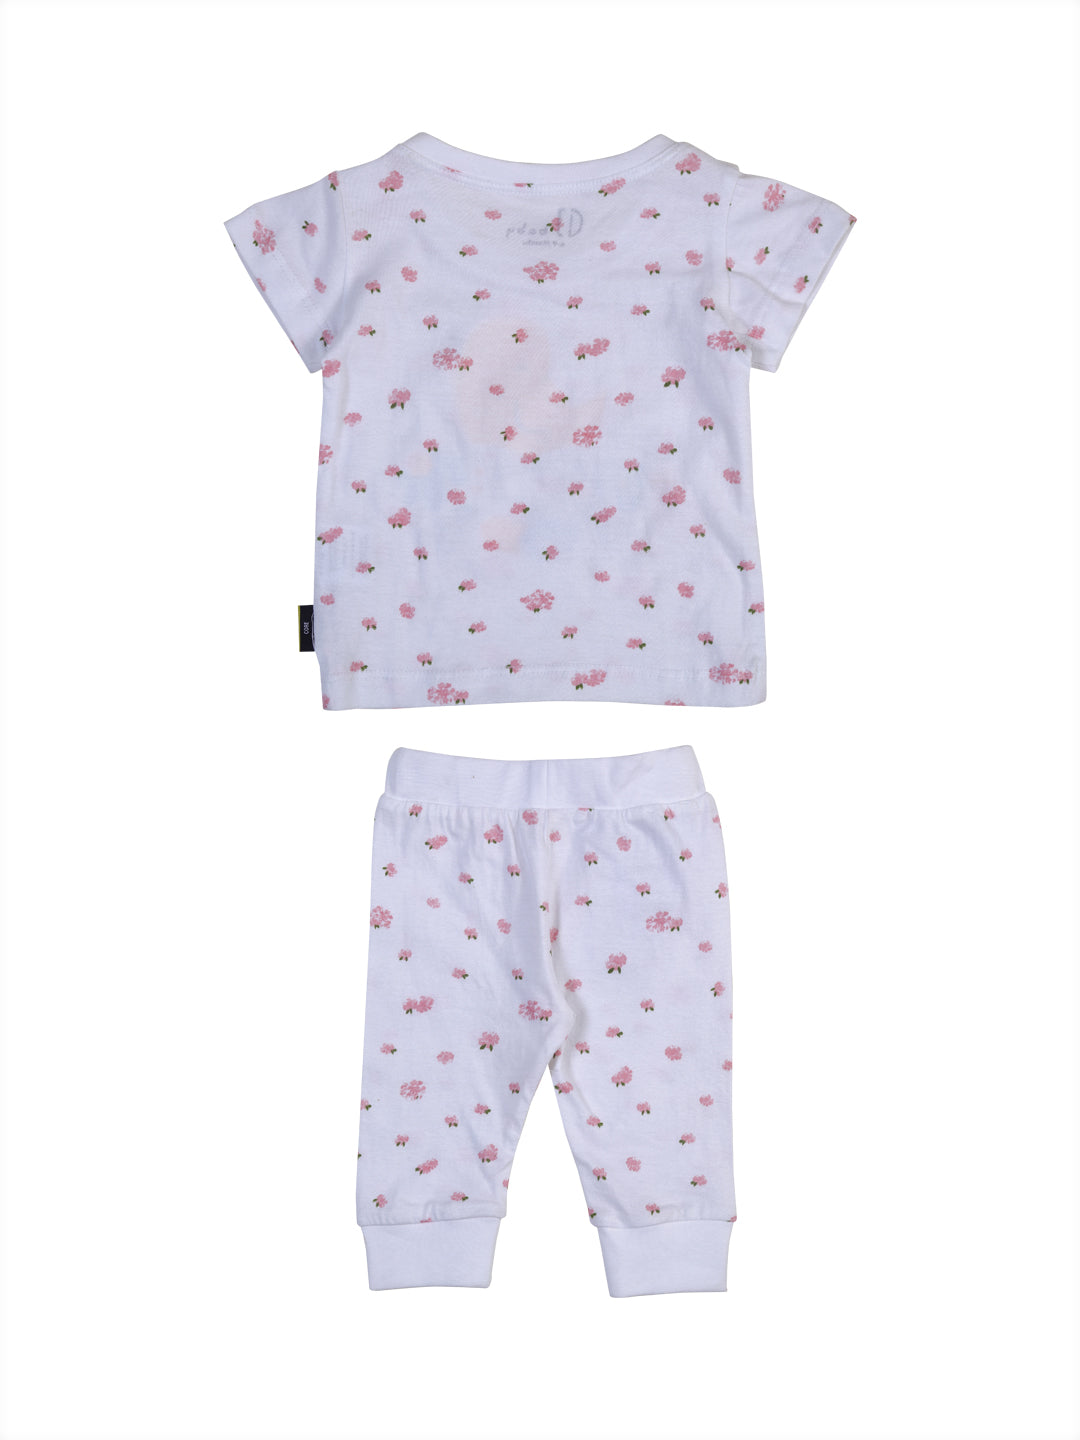 Baby Boys White Printed Knits Co-Ordinate 2 Piece